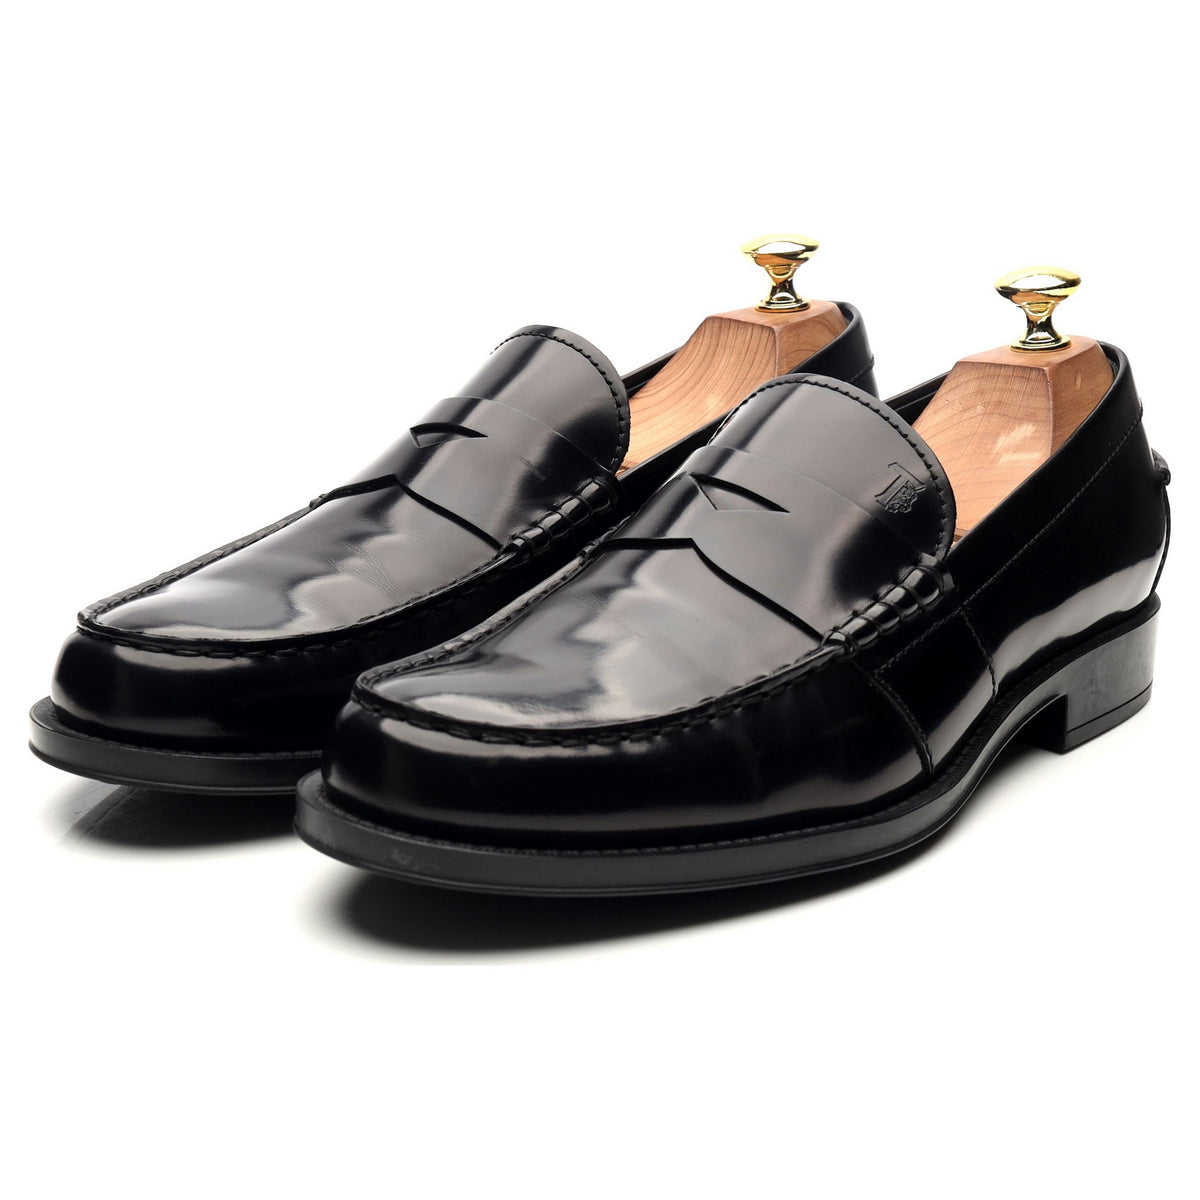 Black Leather Loafers UK 8